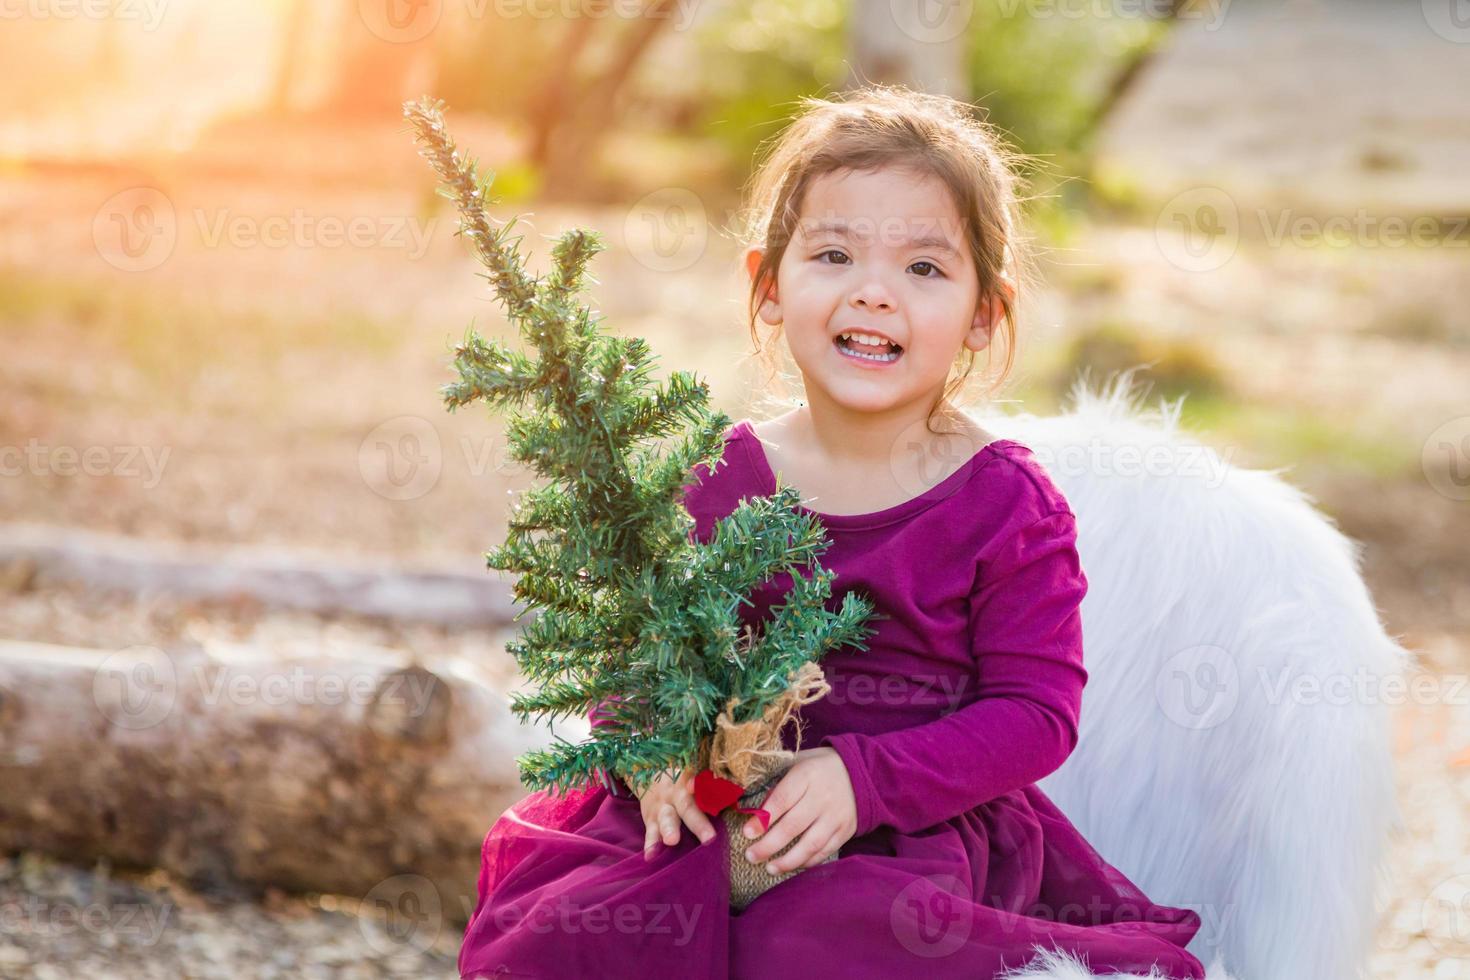 Cute Mixed Race Young Baby Girl Holding Small Christmas Tree Outdoors photo